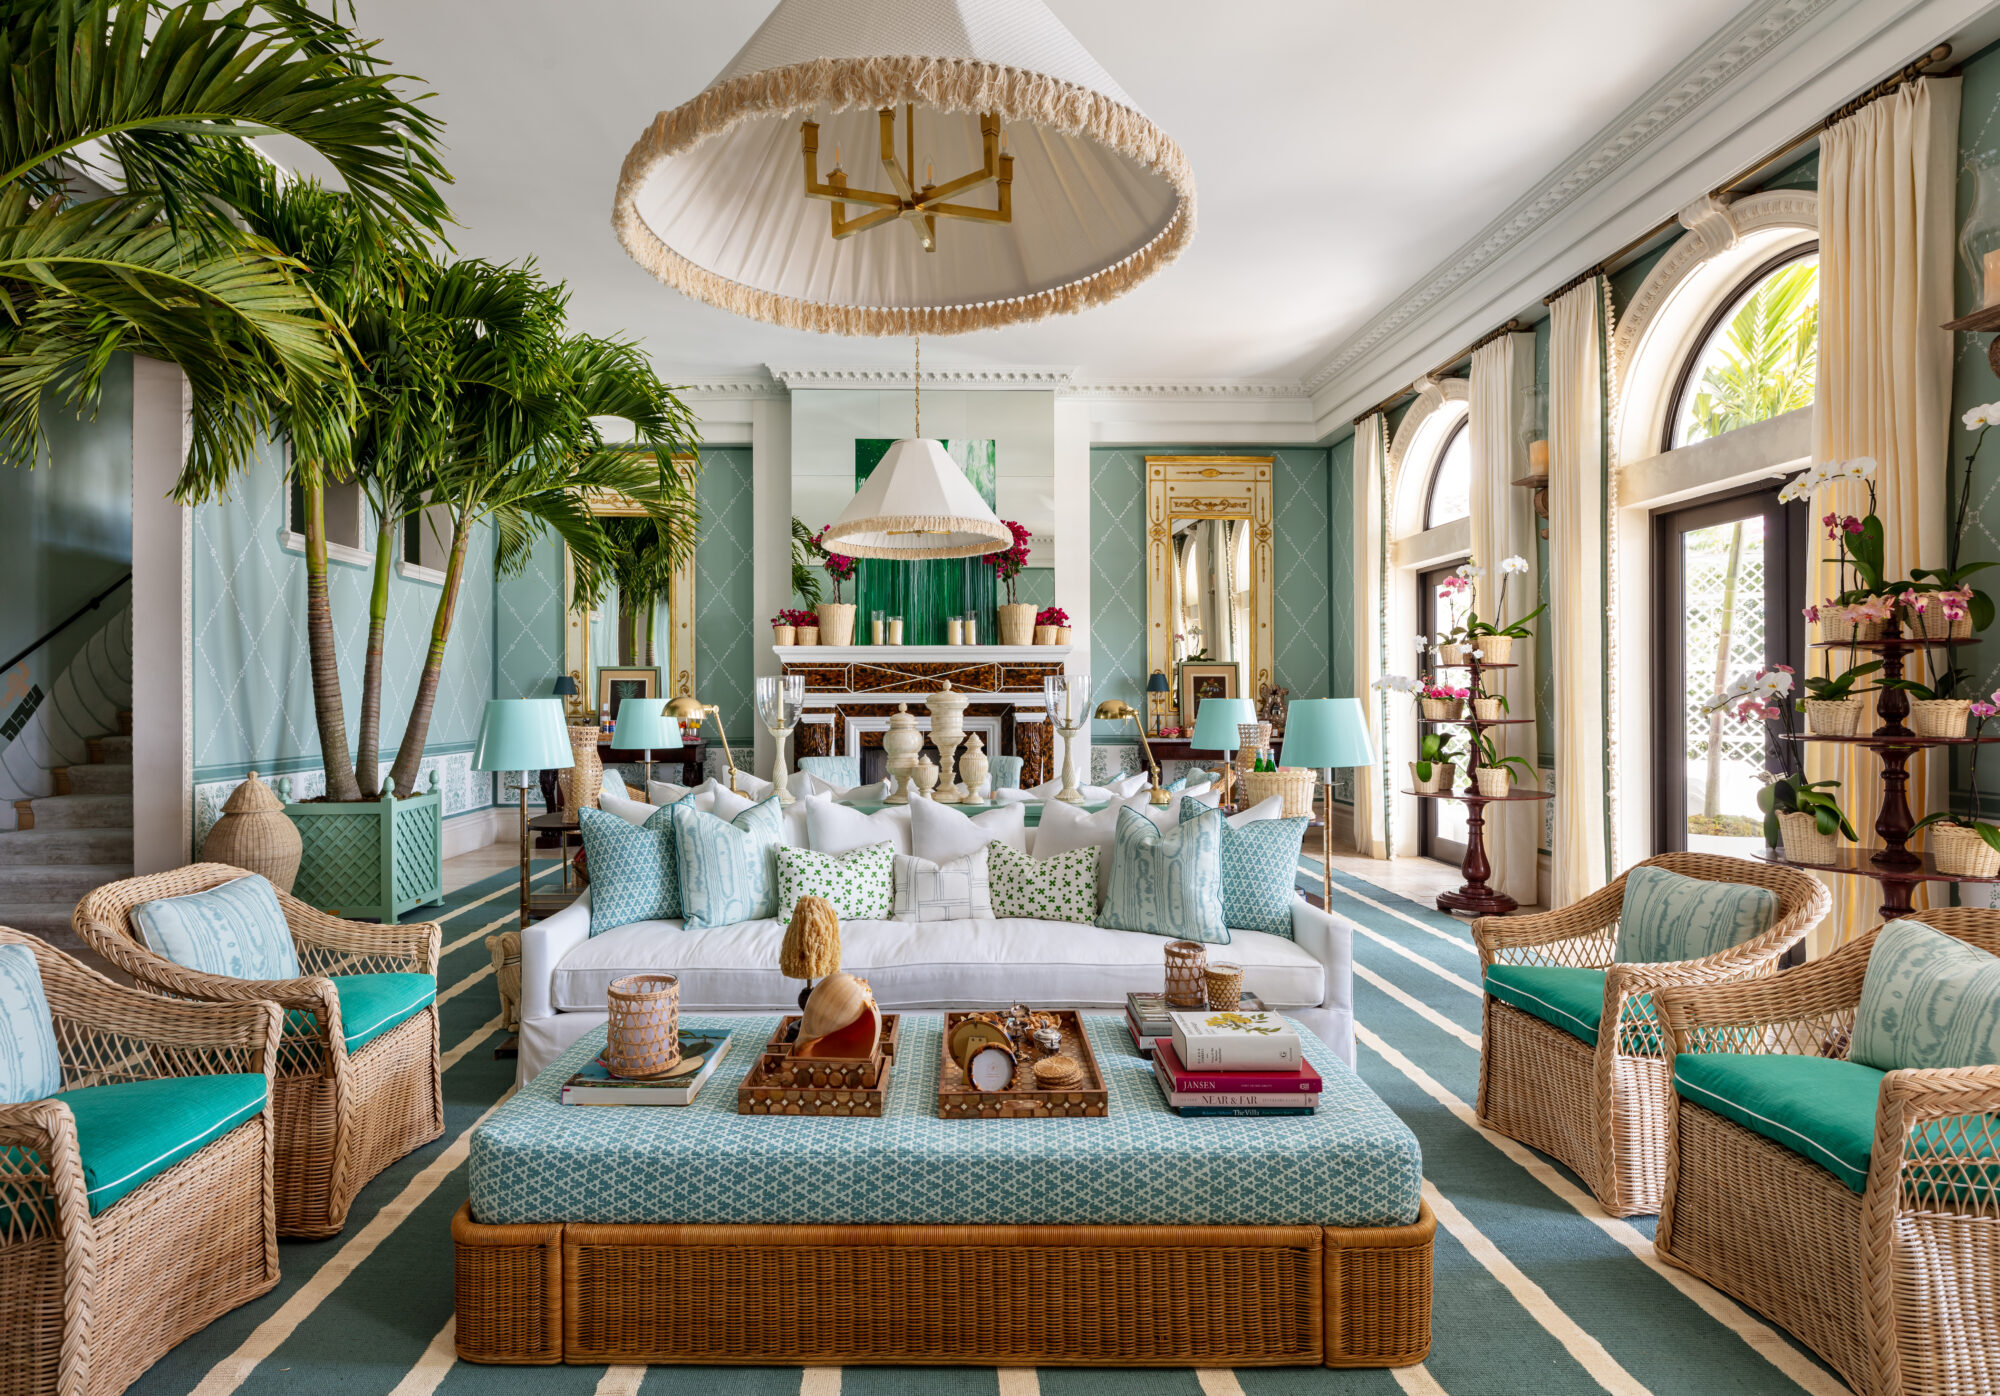 maximalist grand living room with antique furnishings, rattan furniture and palm trees